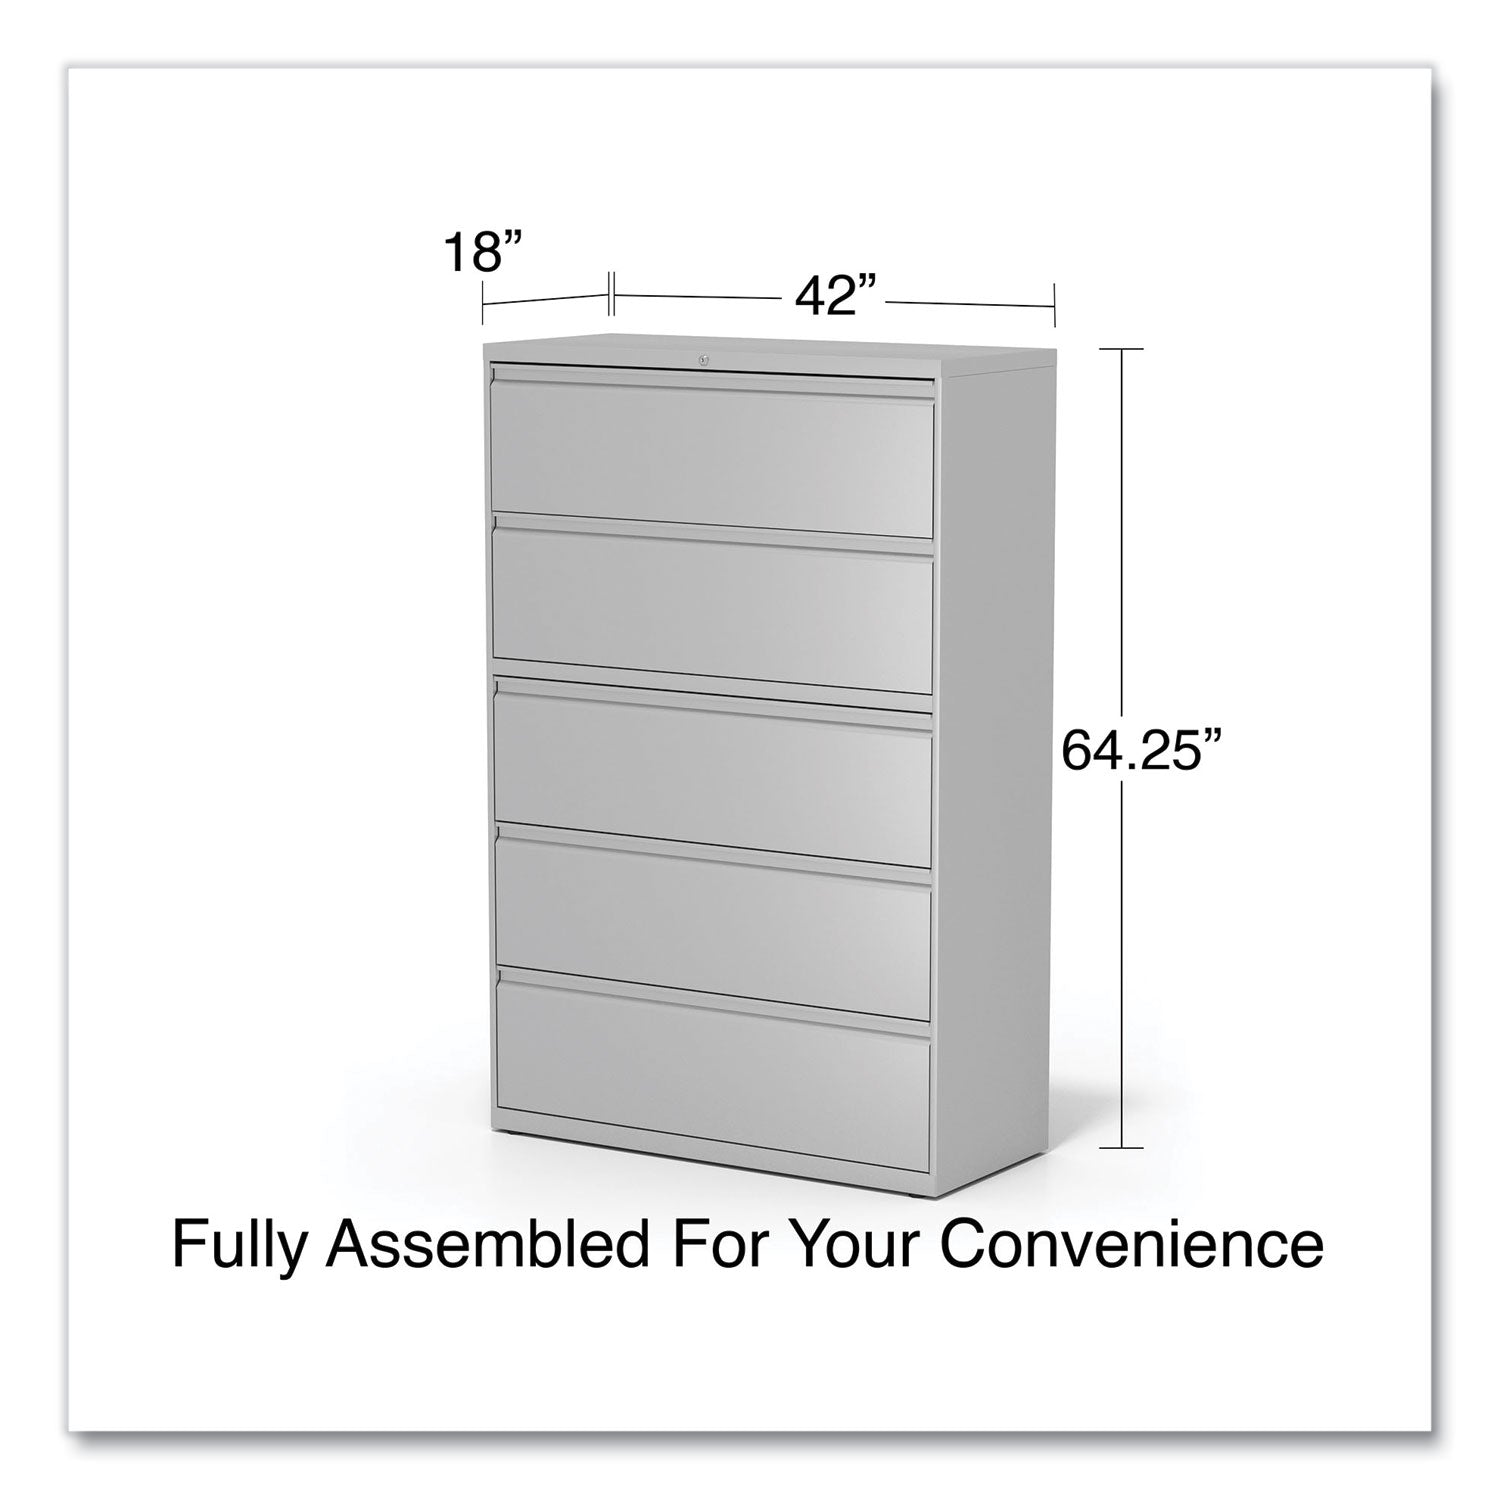 lateral-file-5-legal-letter-a4-a5-size-file-drawers-1-roll-out-posting-shelf-light-gray-42-x-1863-x-6763_alehlf4267lg - 6